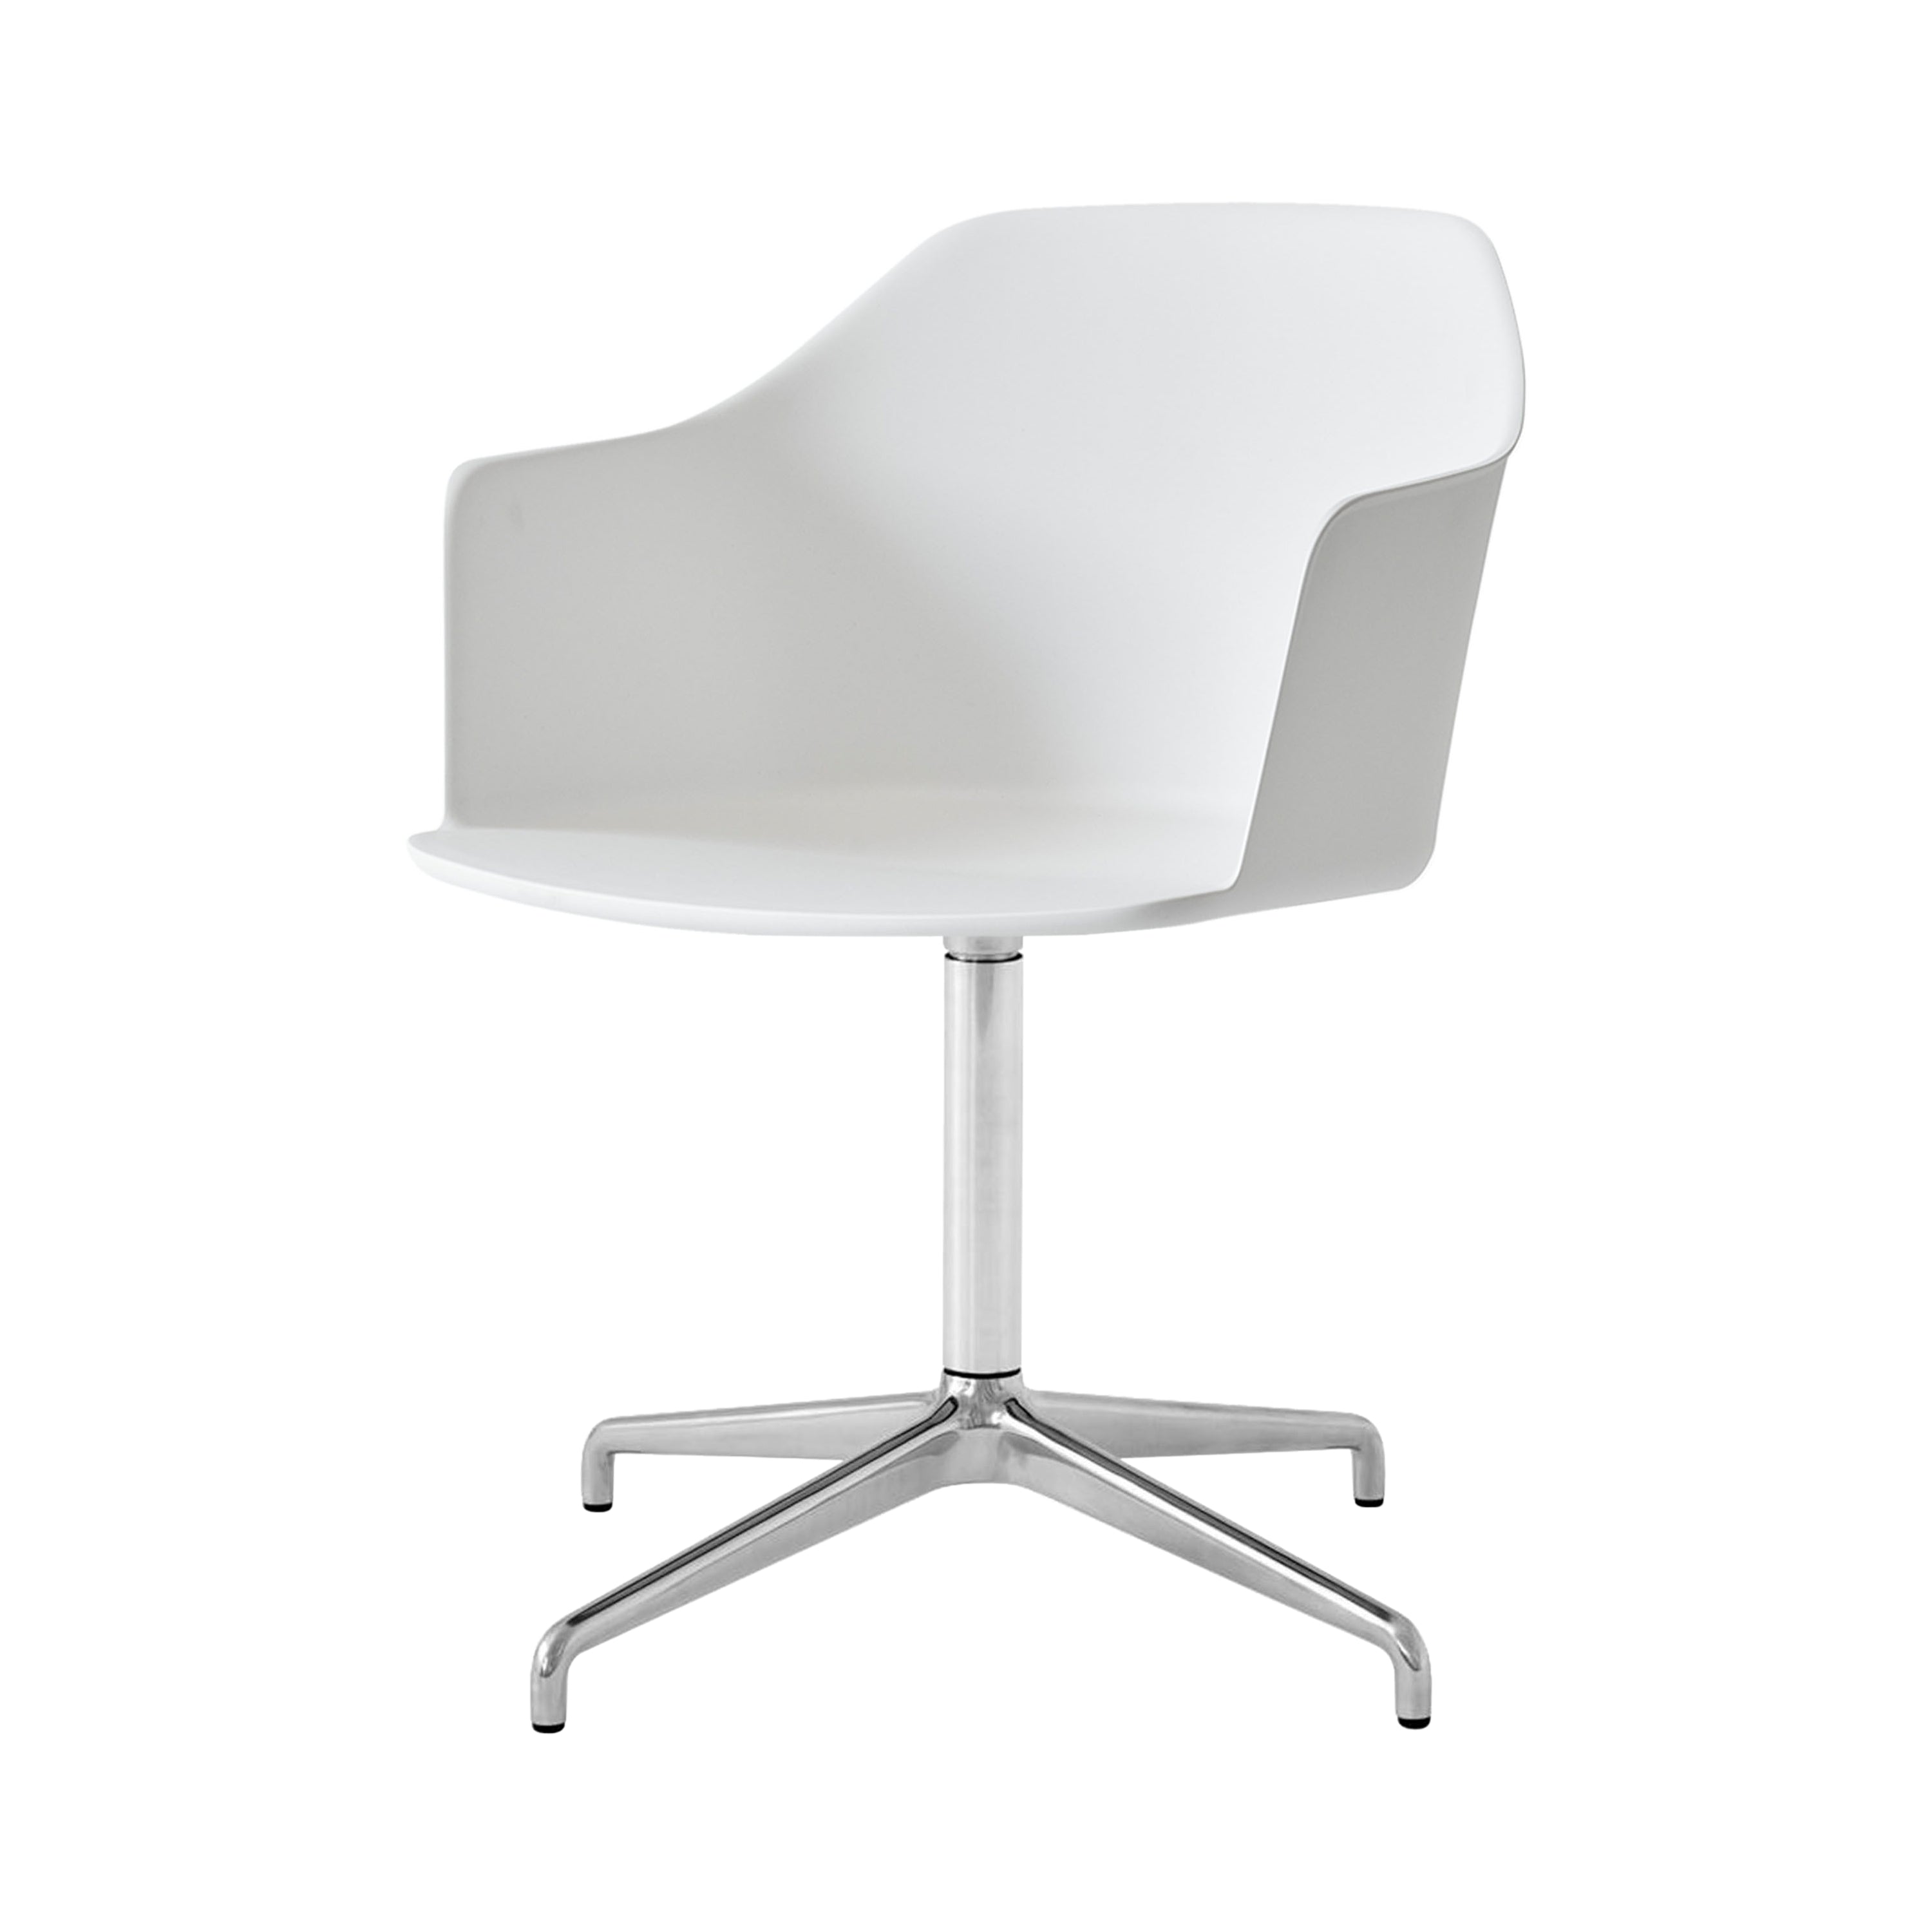 Rely Chair HW38: White + Polished Aluminum